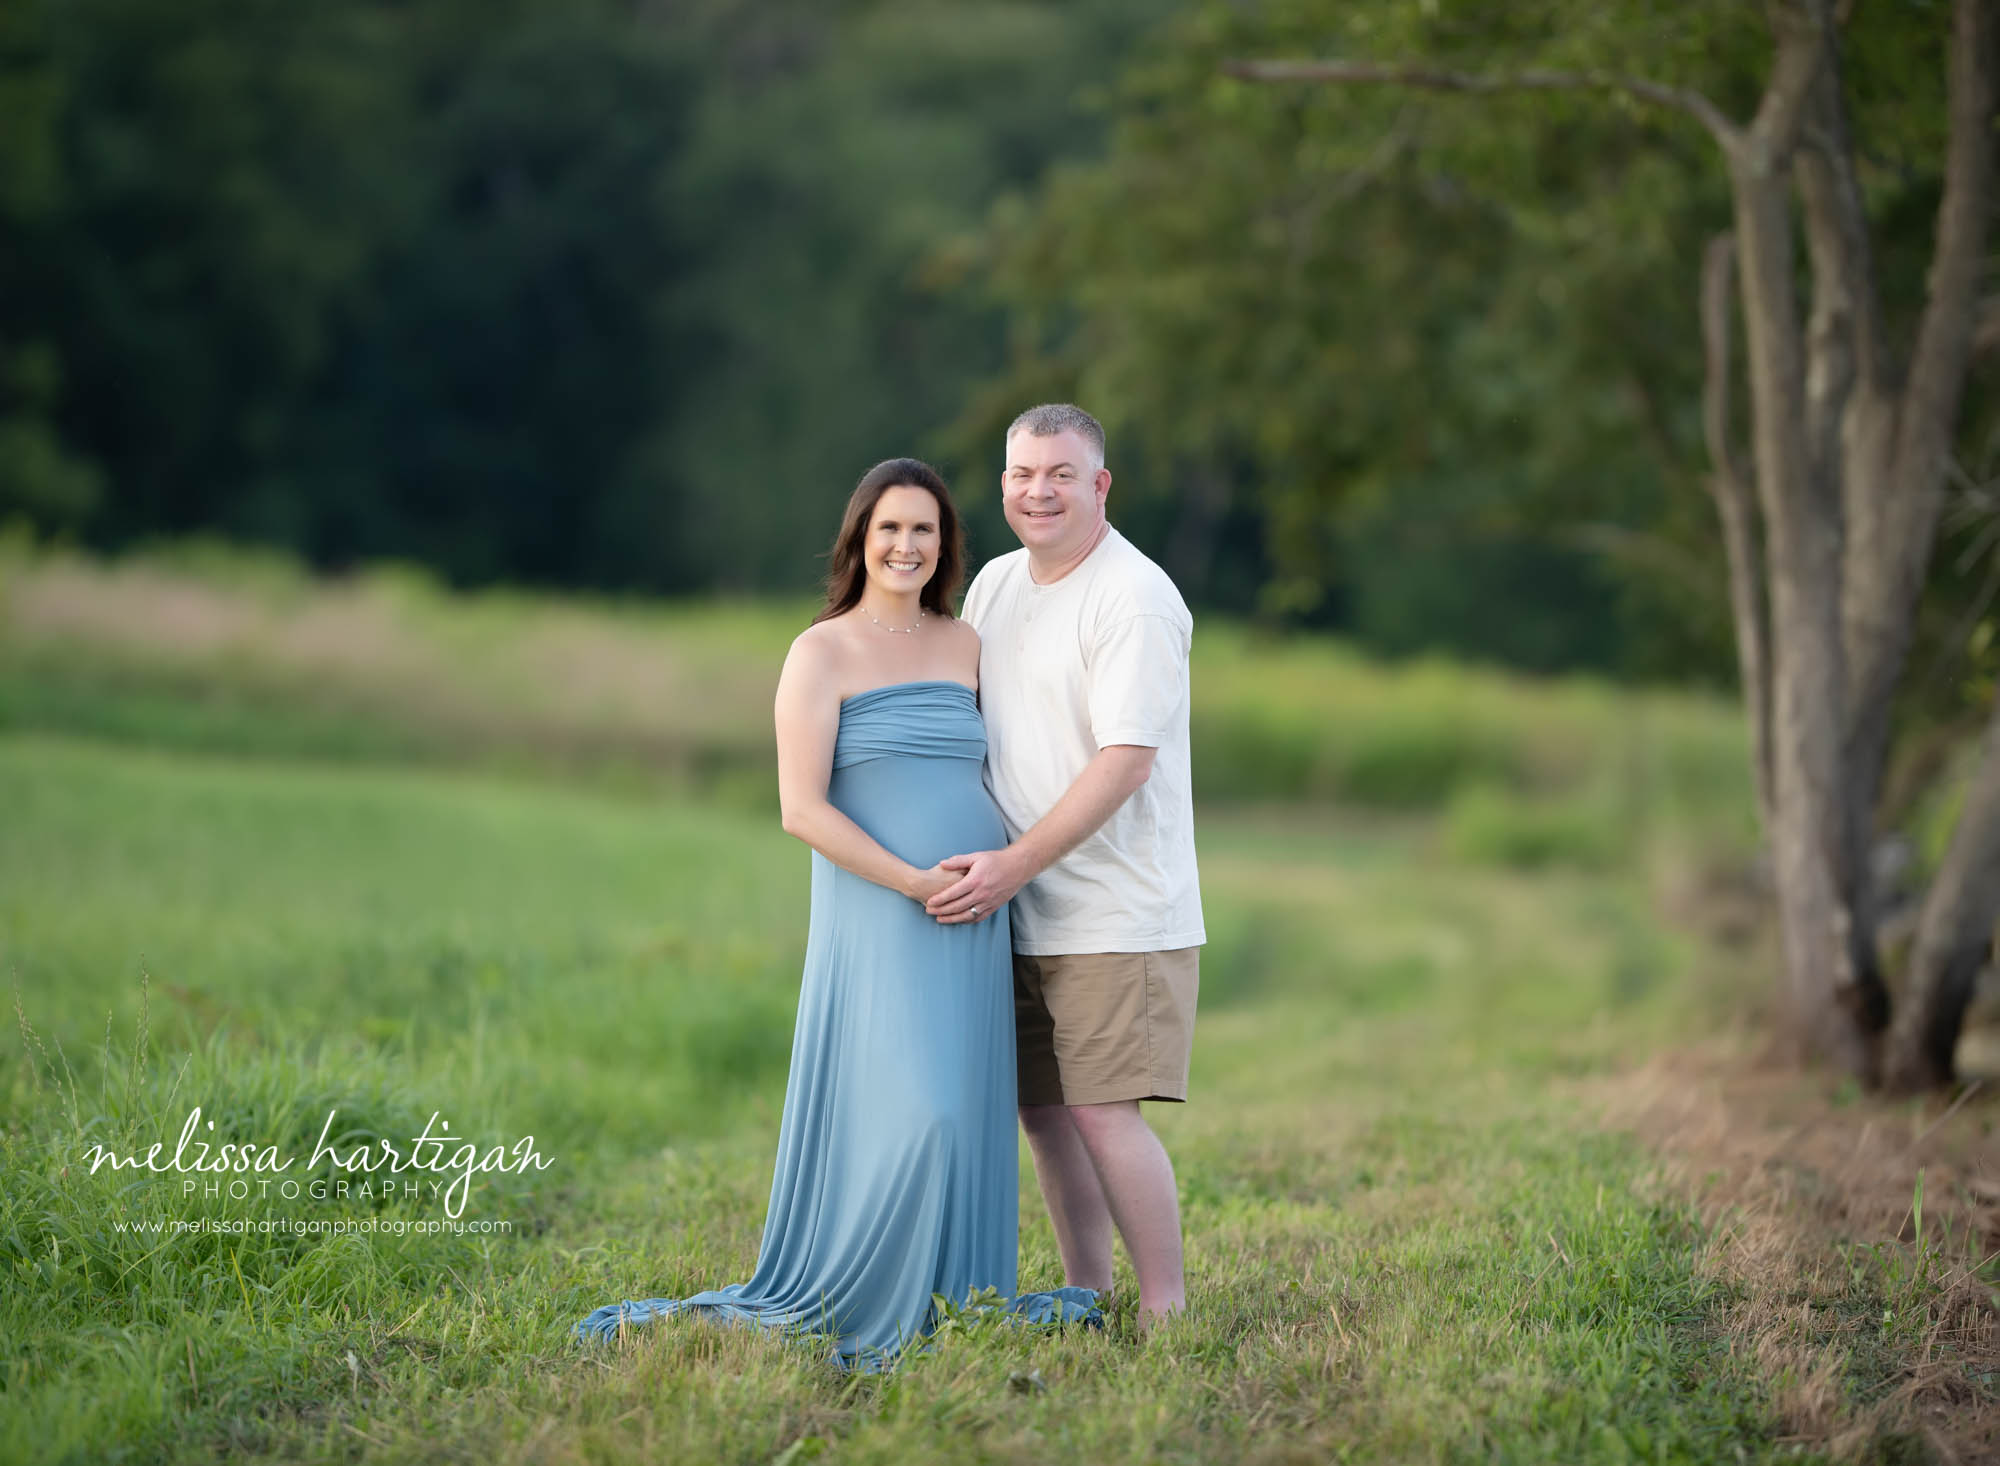 g baby bump couples maternity picture Amston CT maternity photography